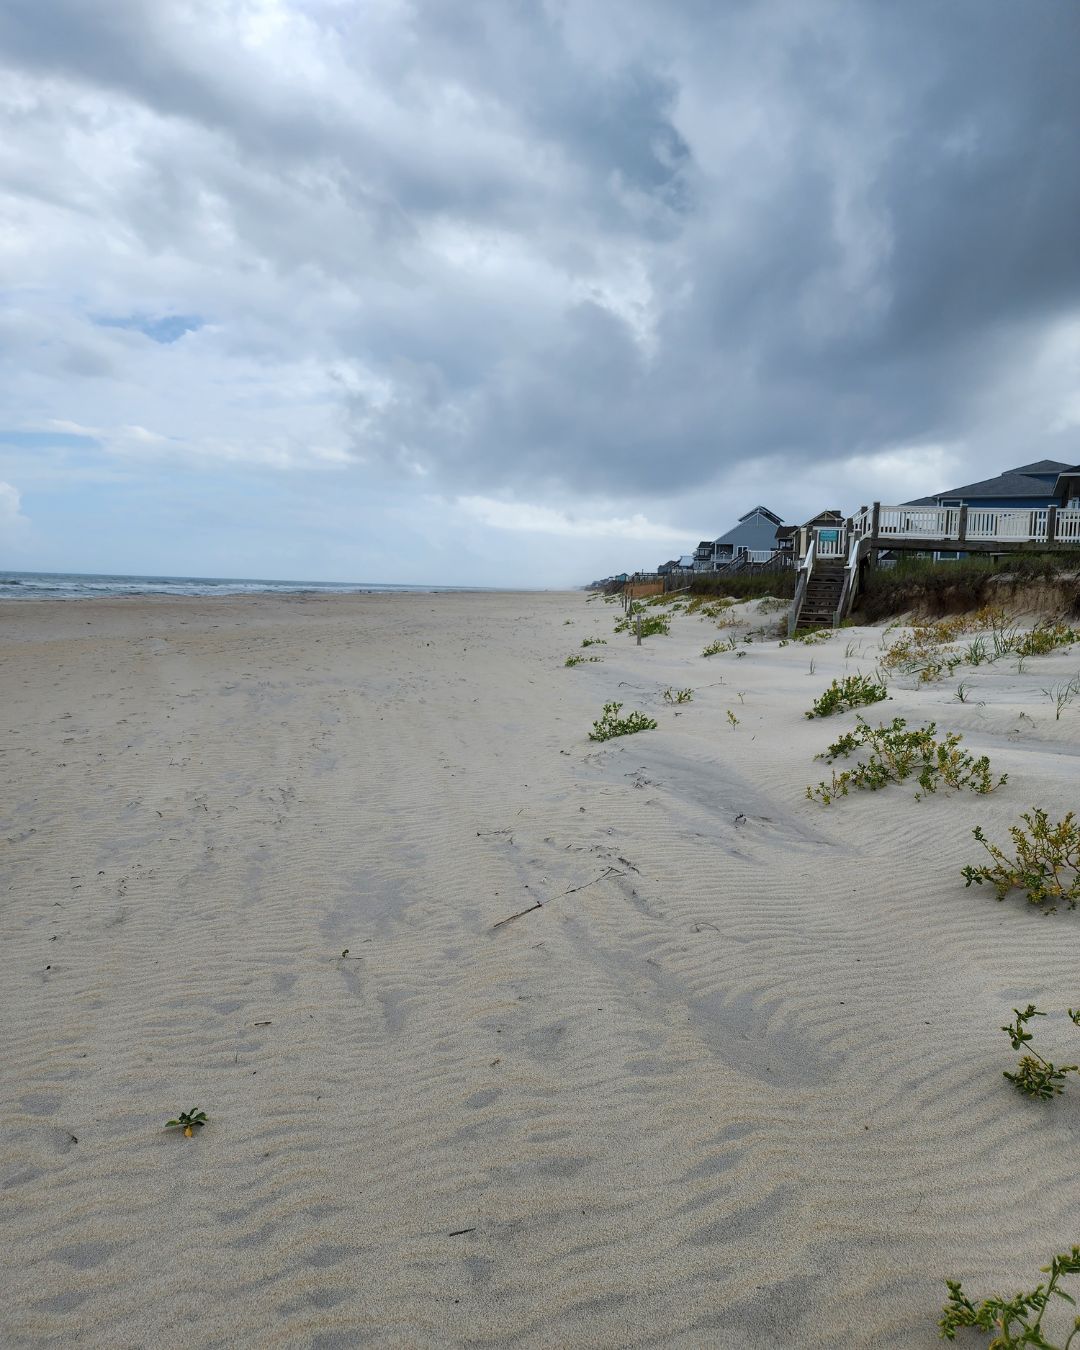 Don't let a little rain ruin your beach day! Check out these tips for making the most of going to the beach in the rain, even in inclement weather.